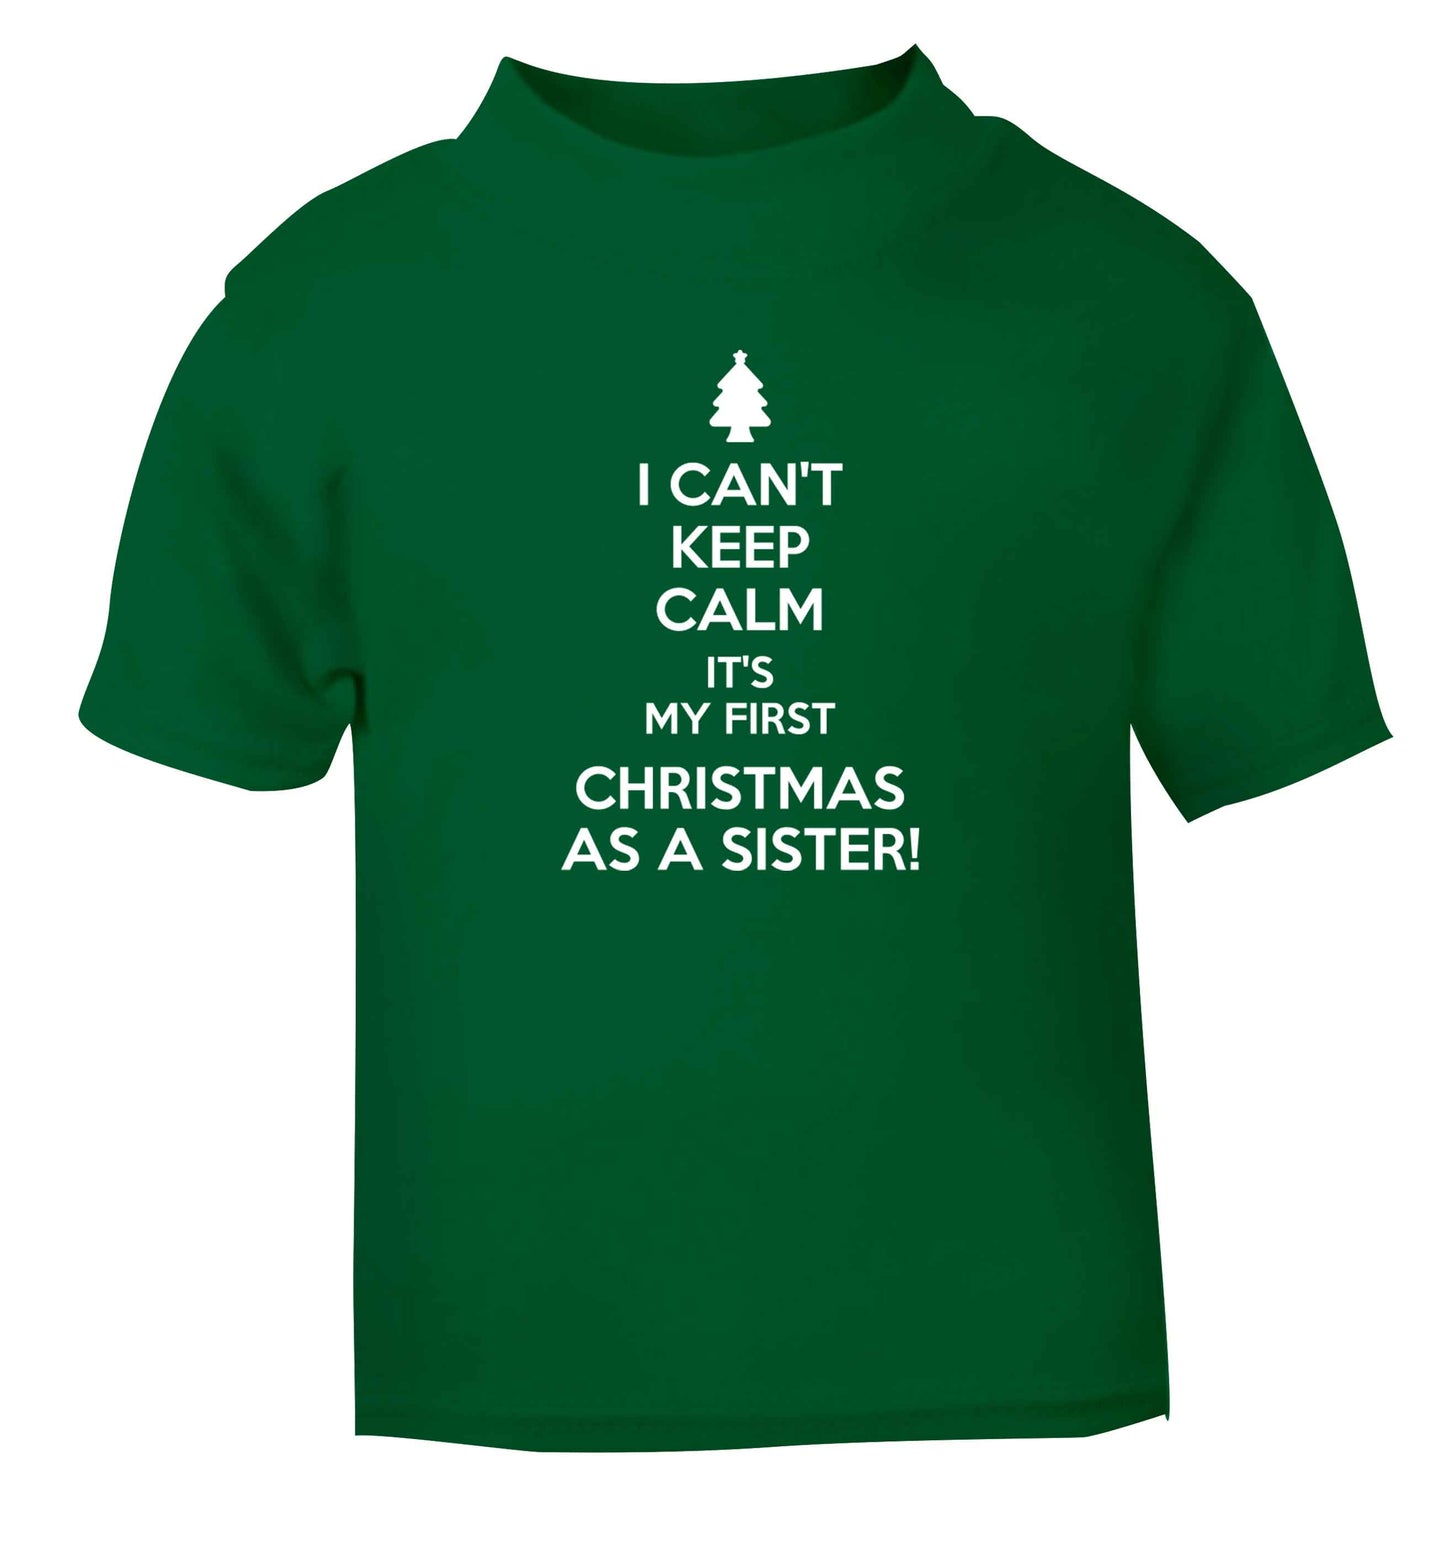 I can't keep calm it's my first Christmas as a sister! green Baby Toddler Tshirt 2 Years